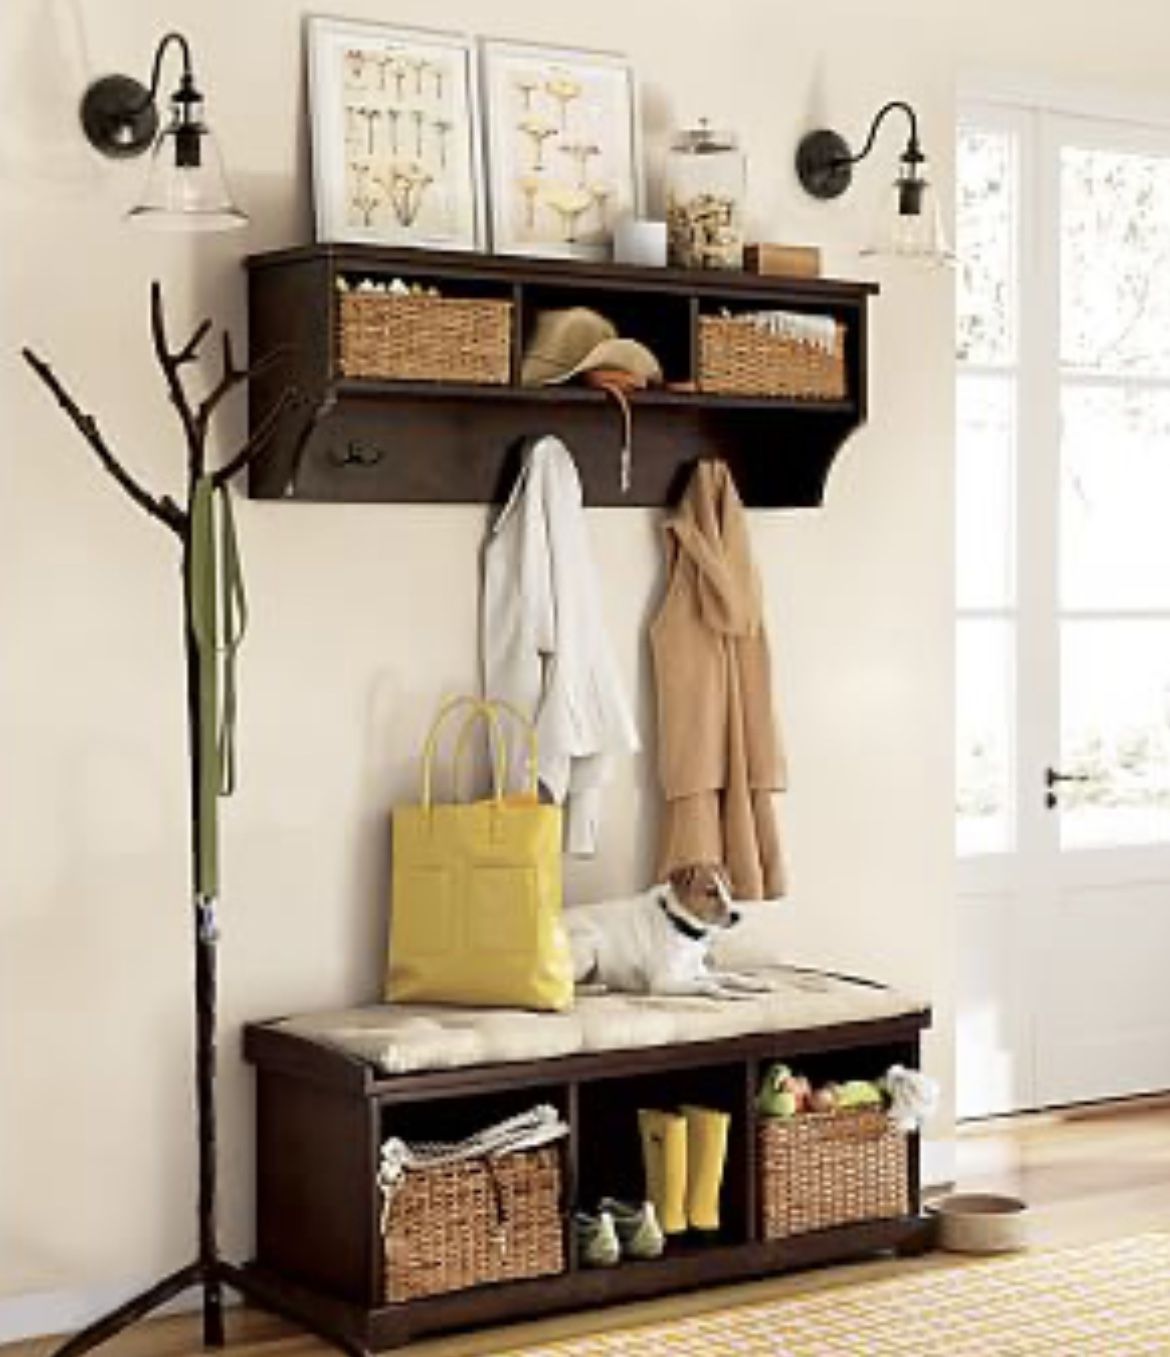 Entryway Bench & Hanging Shelf from Pottery Barn